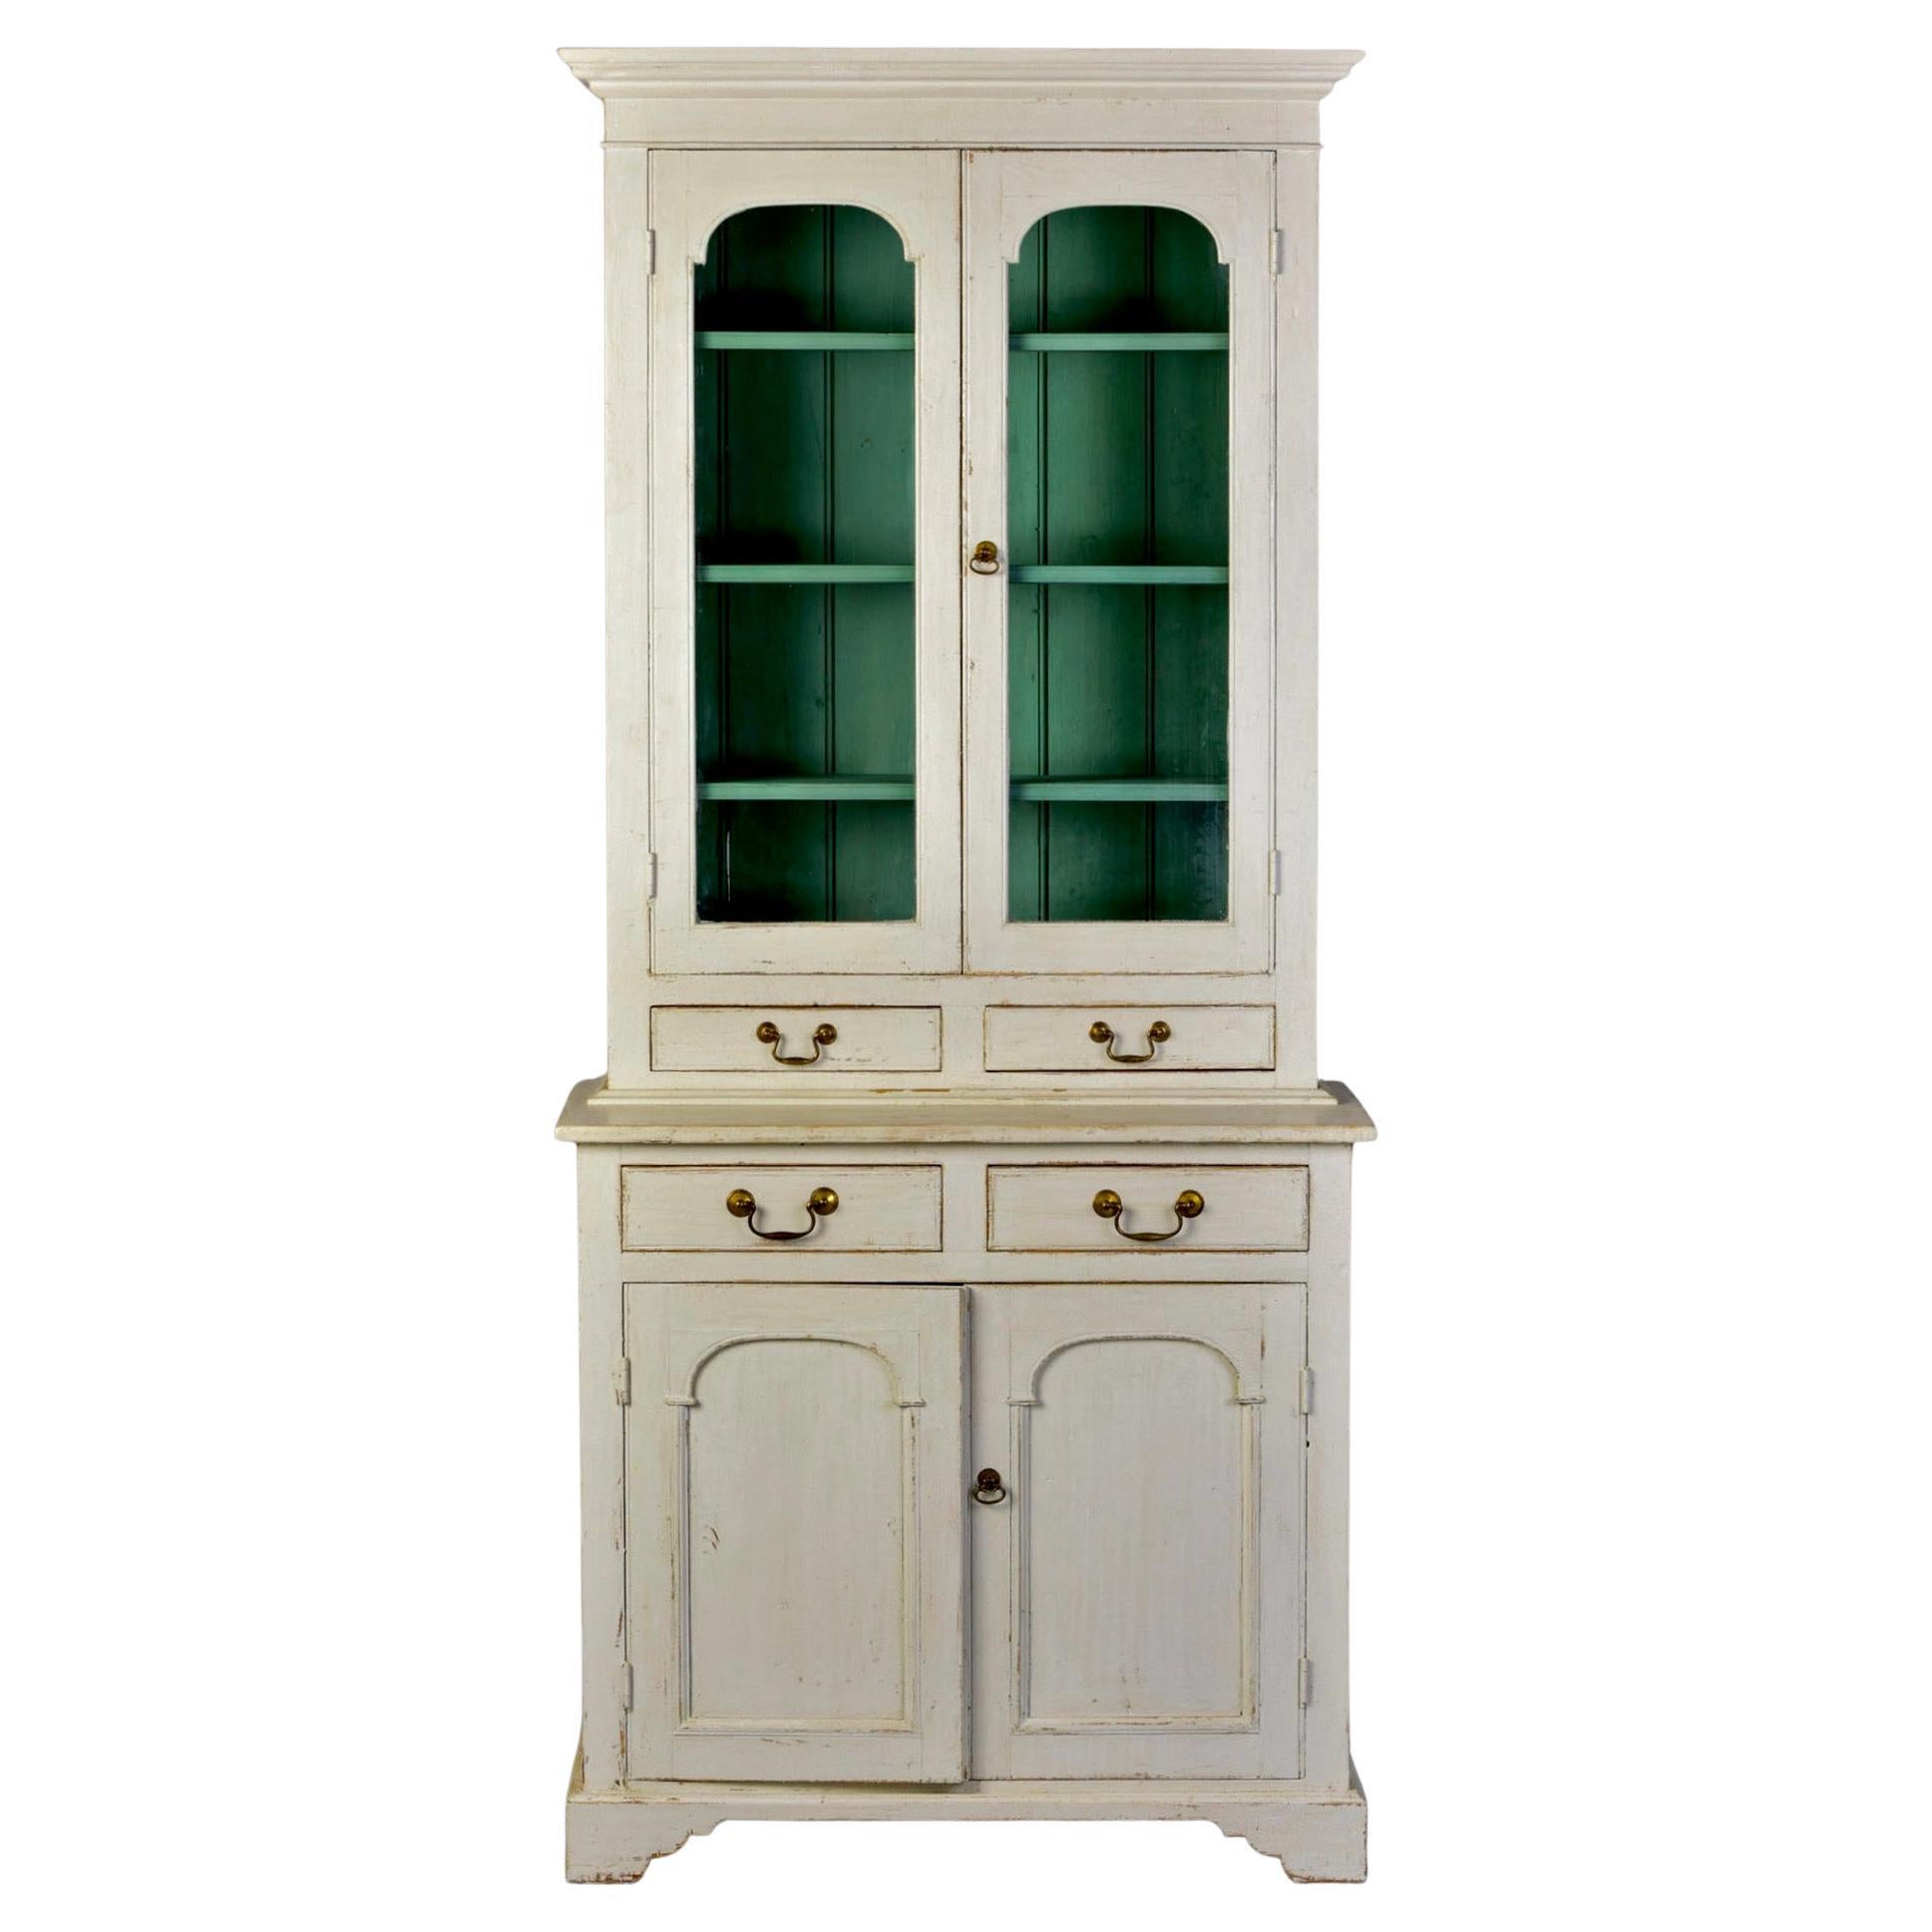 Small 19th C English Glazed Bookcase with White Paint and Blue Shelves